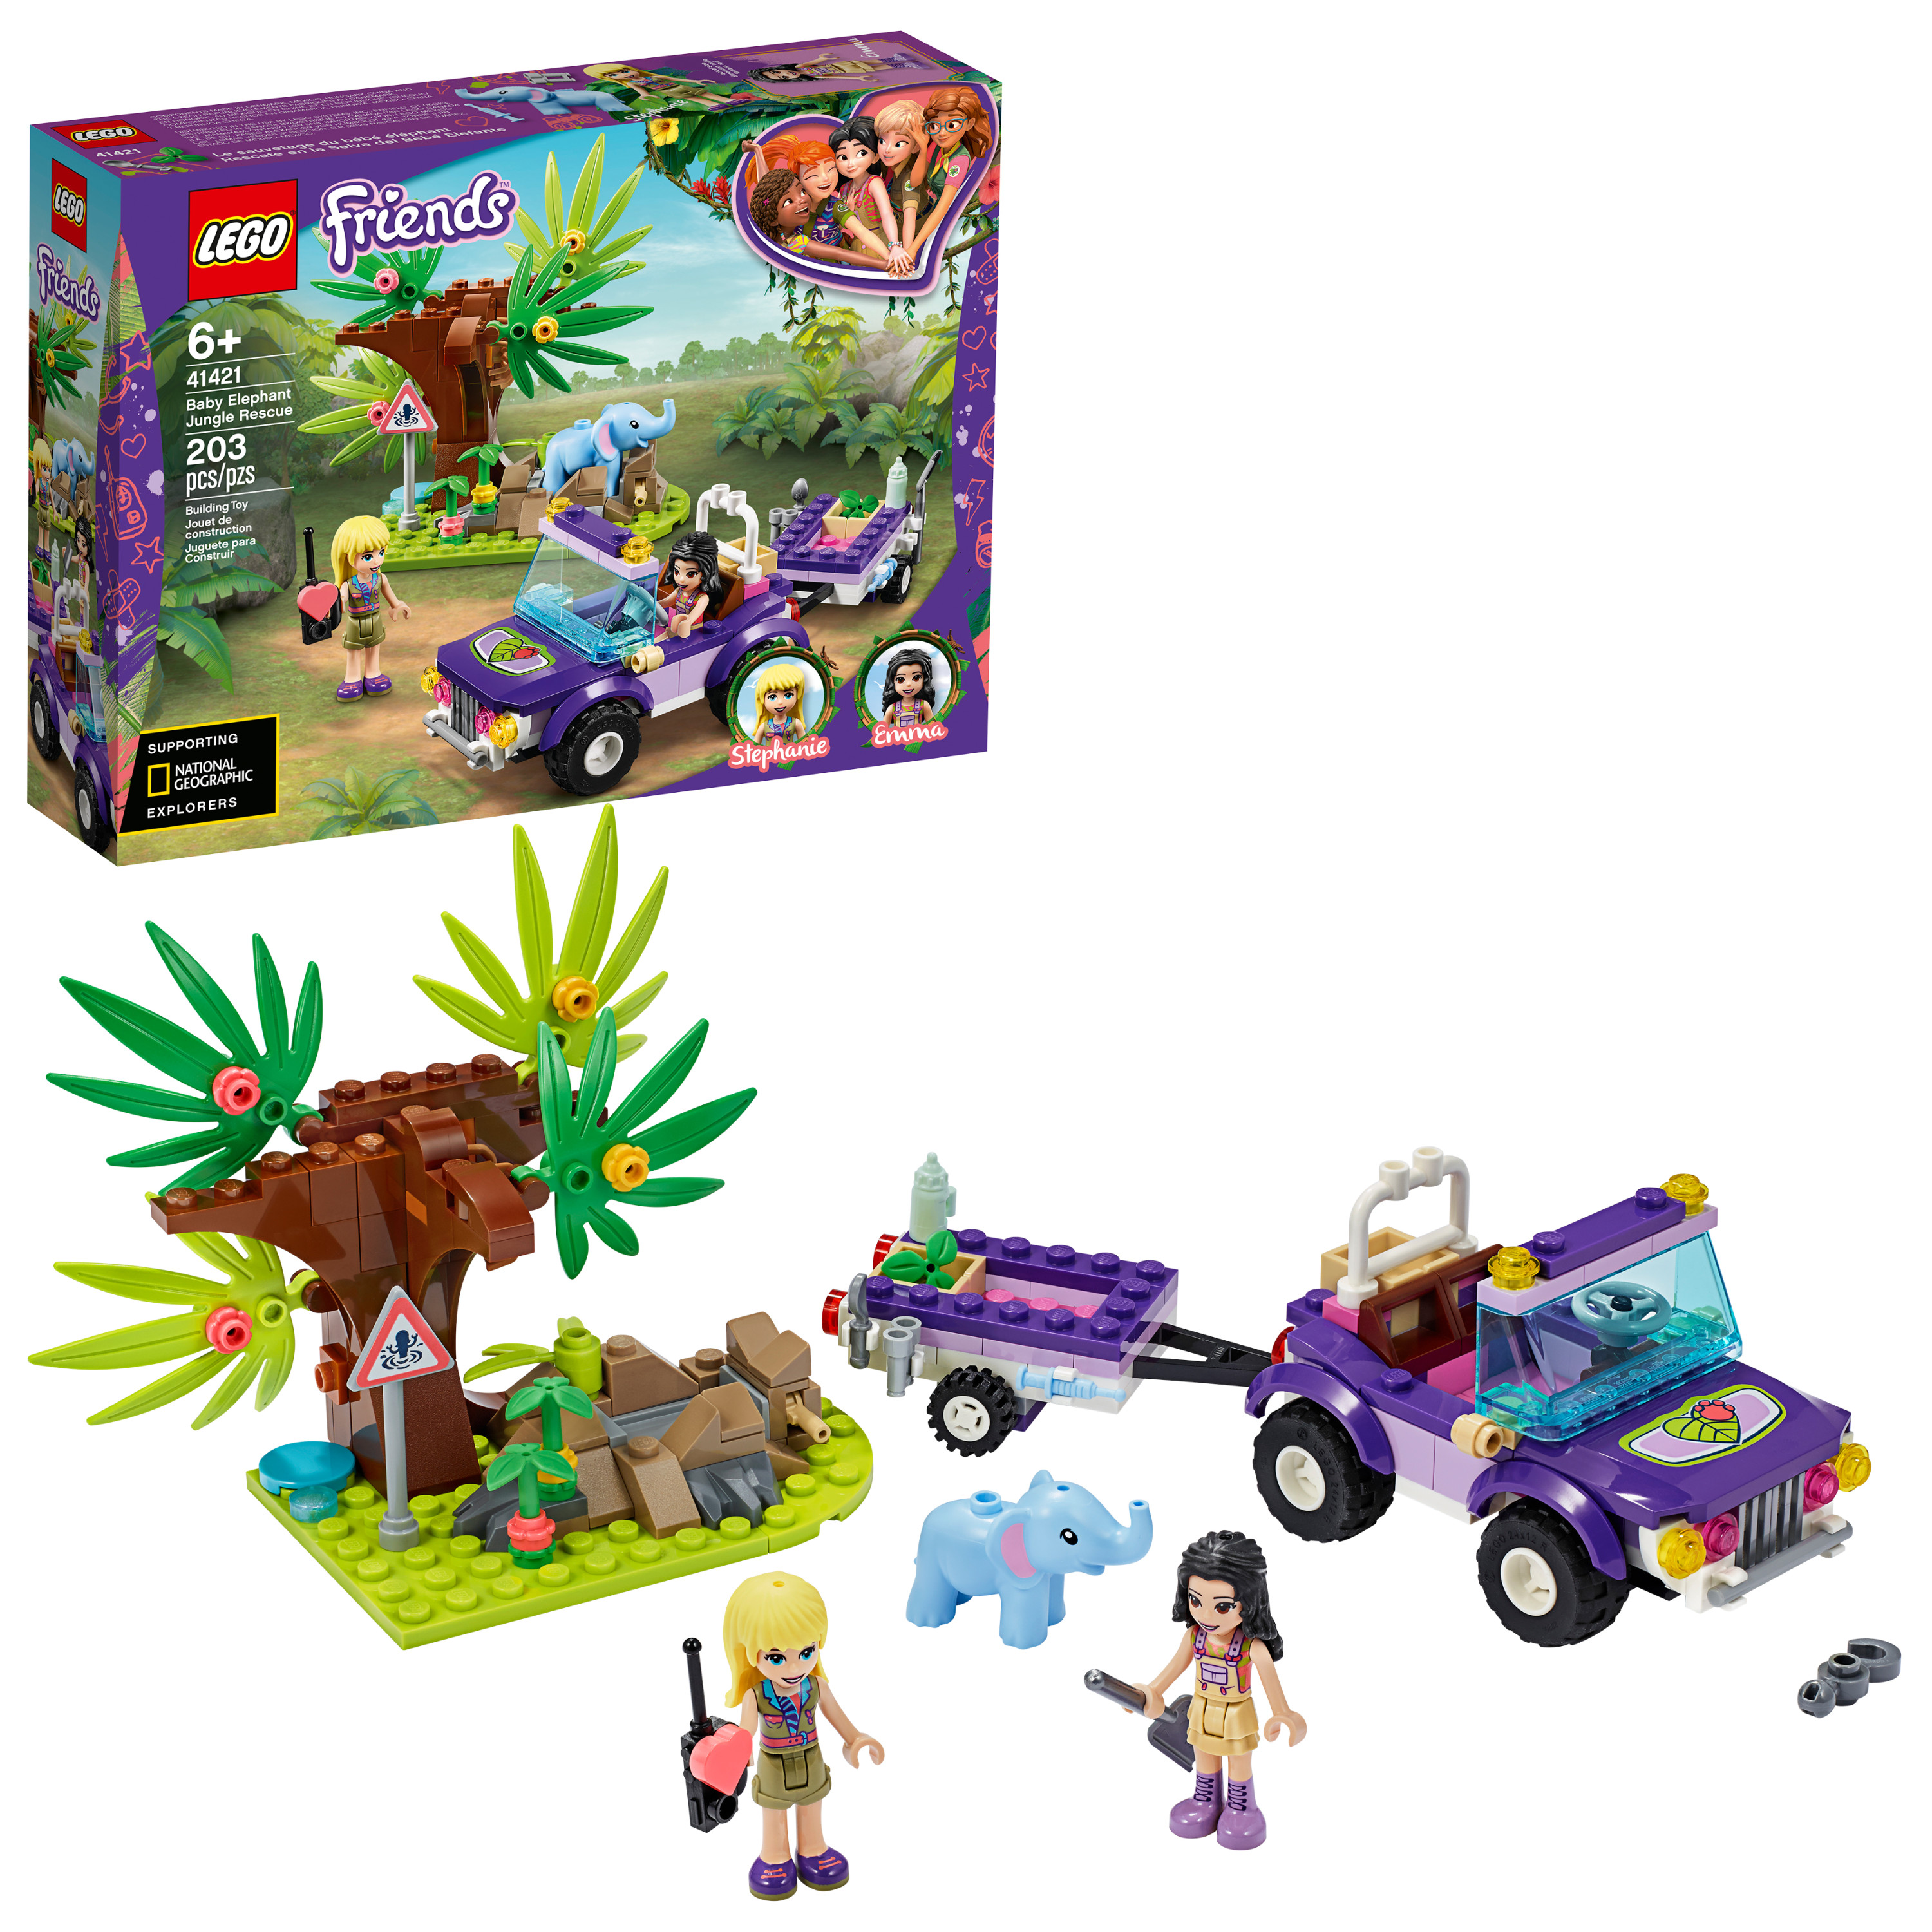 LEGO Friends Baby Elephant Jungle Rescue 41421 Building Toy for Kids; Jungle Rescue Fun Toy Promotes Creative Play (203 Pieces) - image 1 of 8